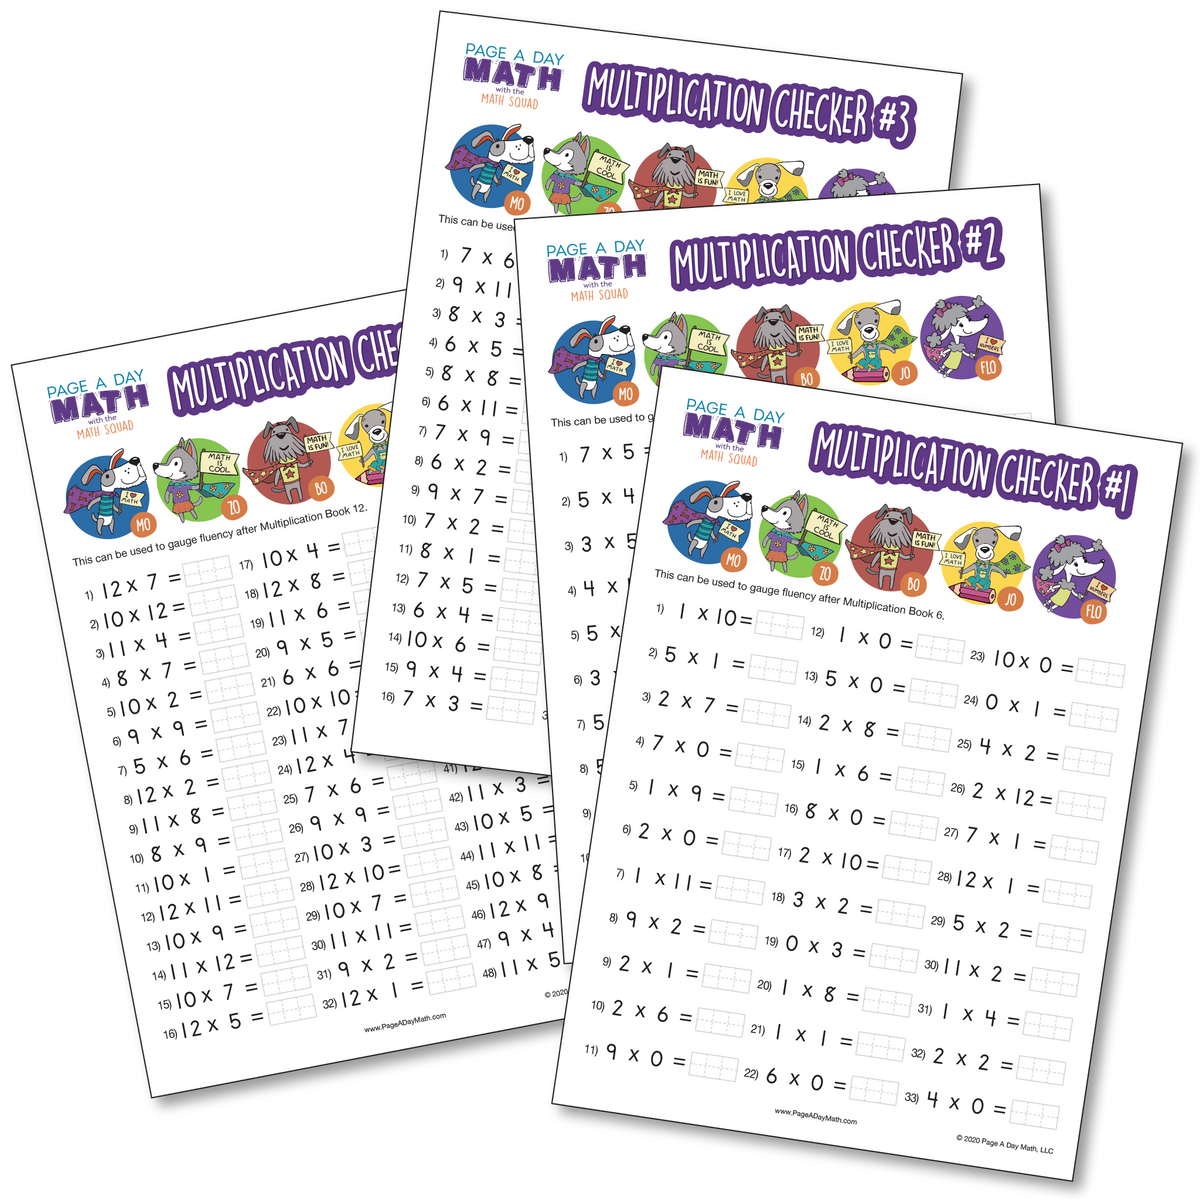 multiplication-assessments-4-printable-multiplication-assessment-tests-pdf-page-a-day-math